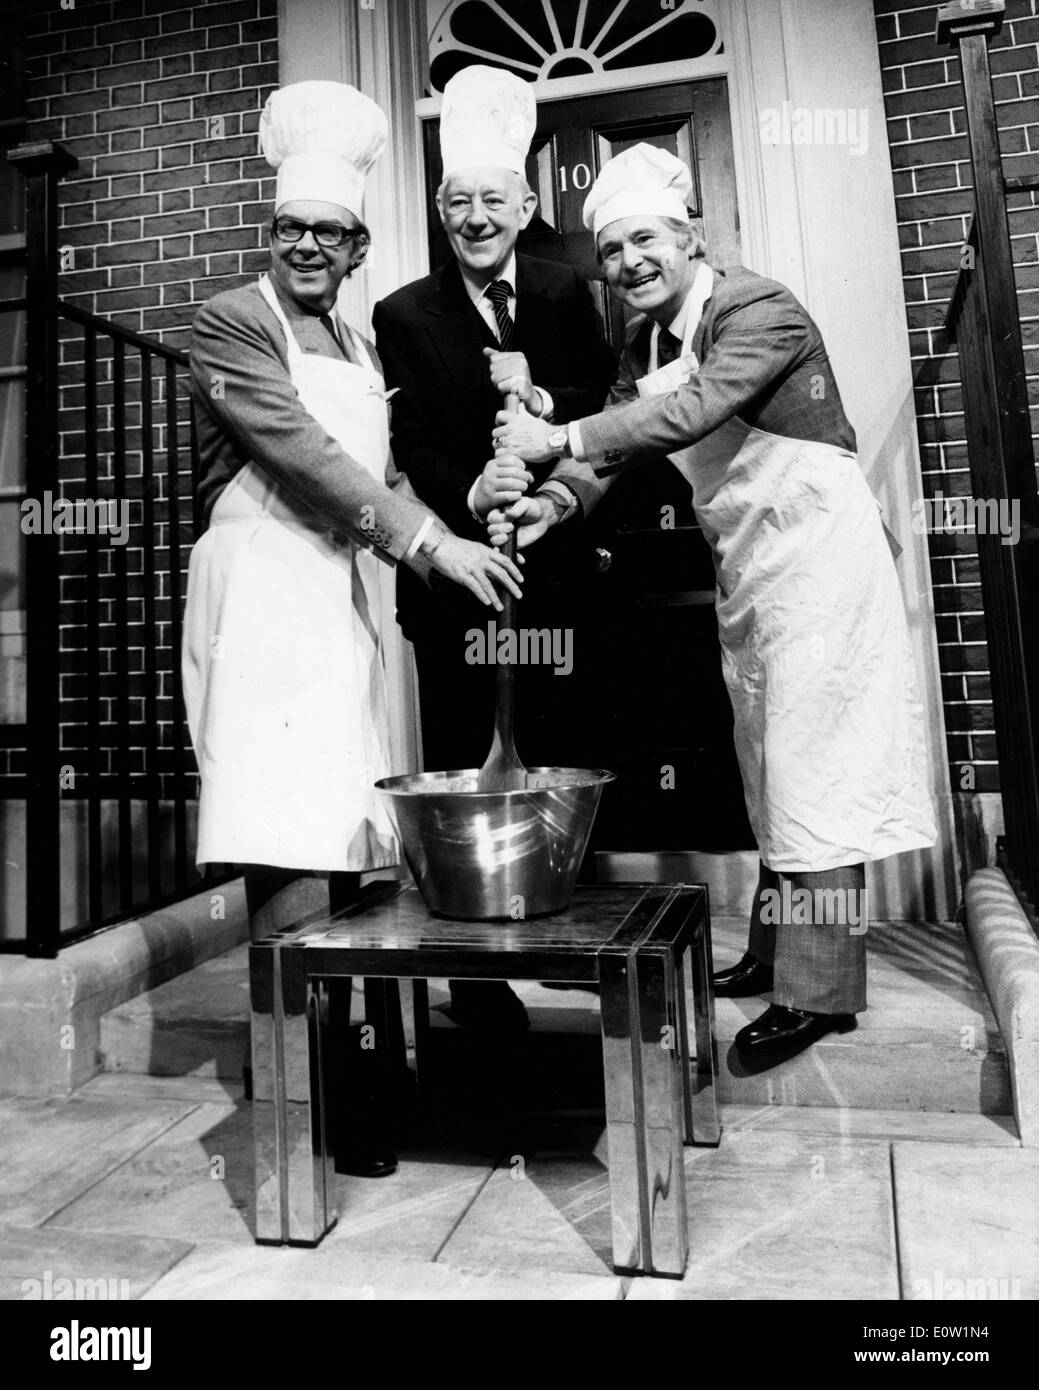 Actor Alec Guinness cooking outside No. 10 Downing Stock Photo